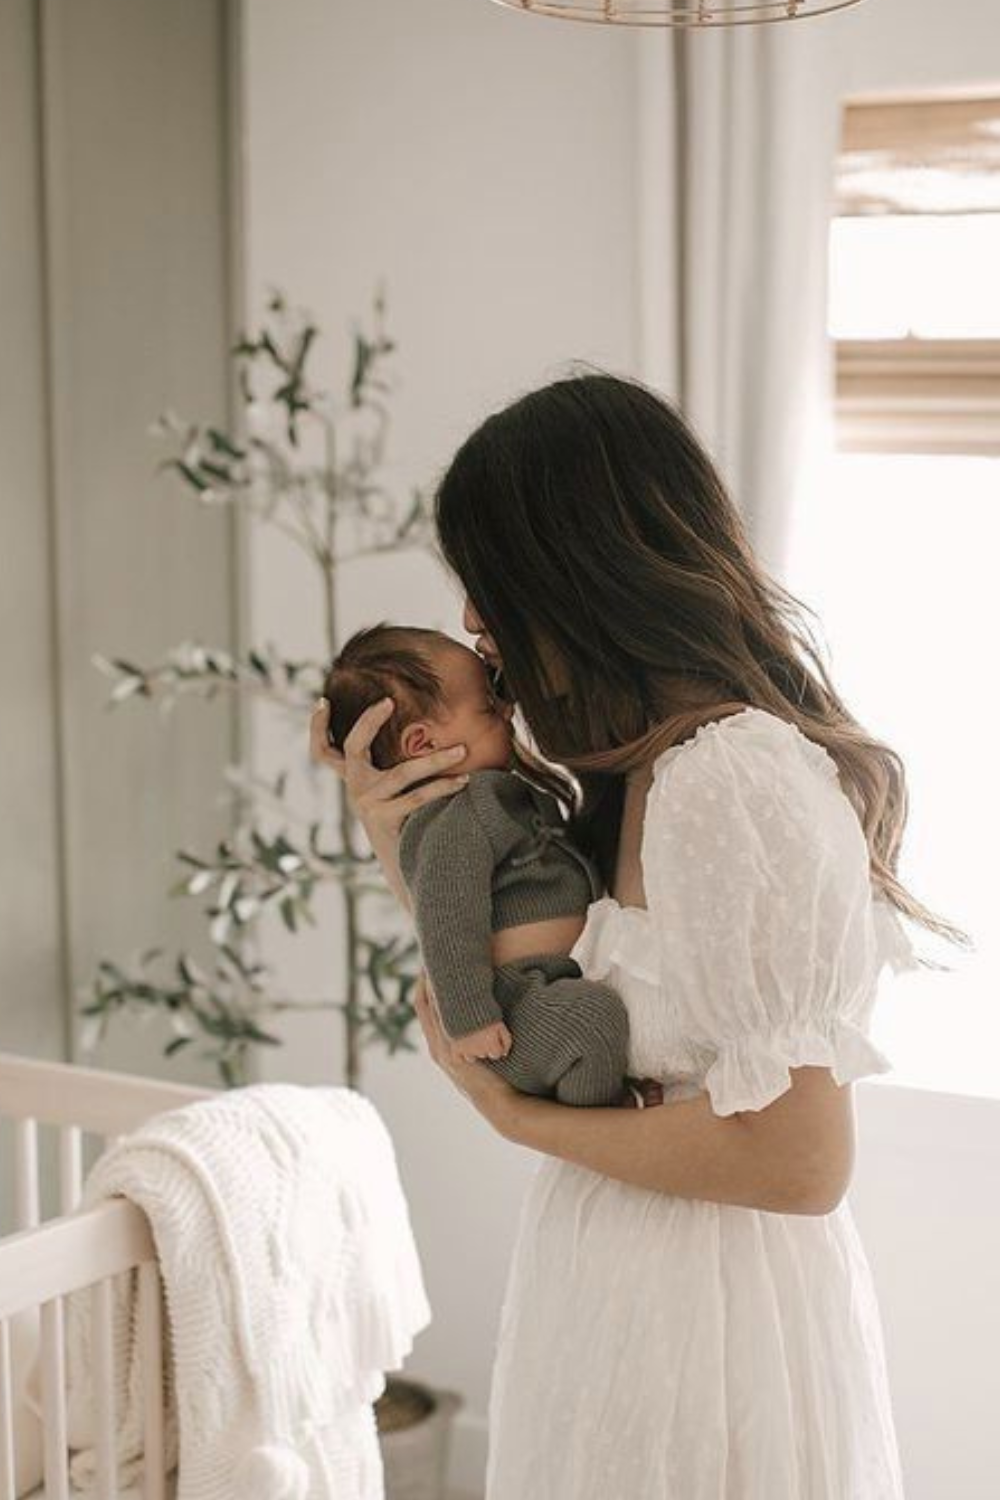 New mom lovingly cradles her newborn baby in a beautifully decorated nursery, illustrating the essence of crafting the perfect Postpartum Basket. Discover thoughtful gift ideas to support new mothers.